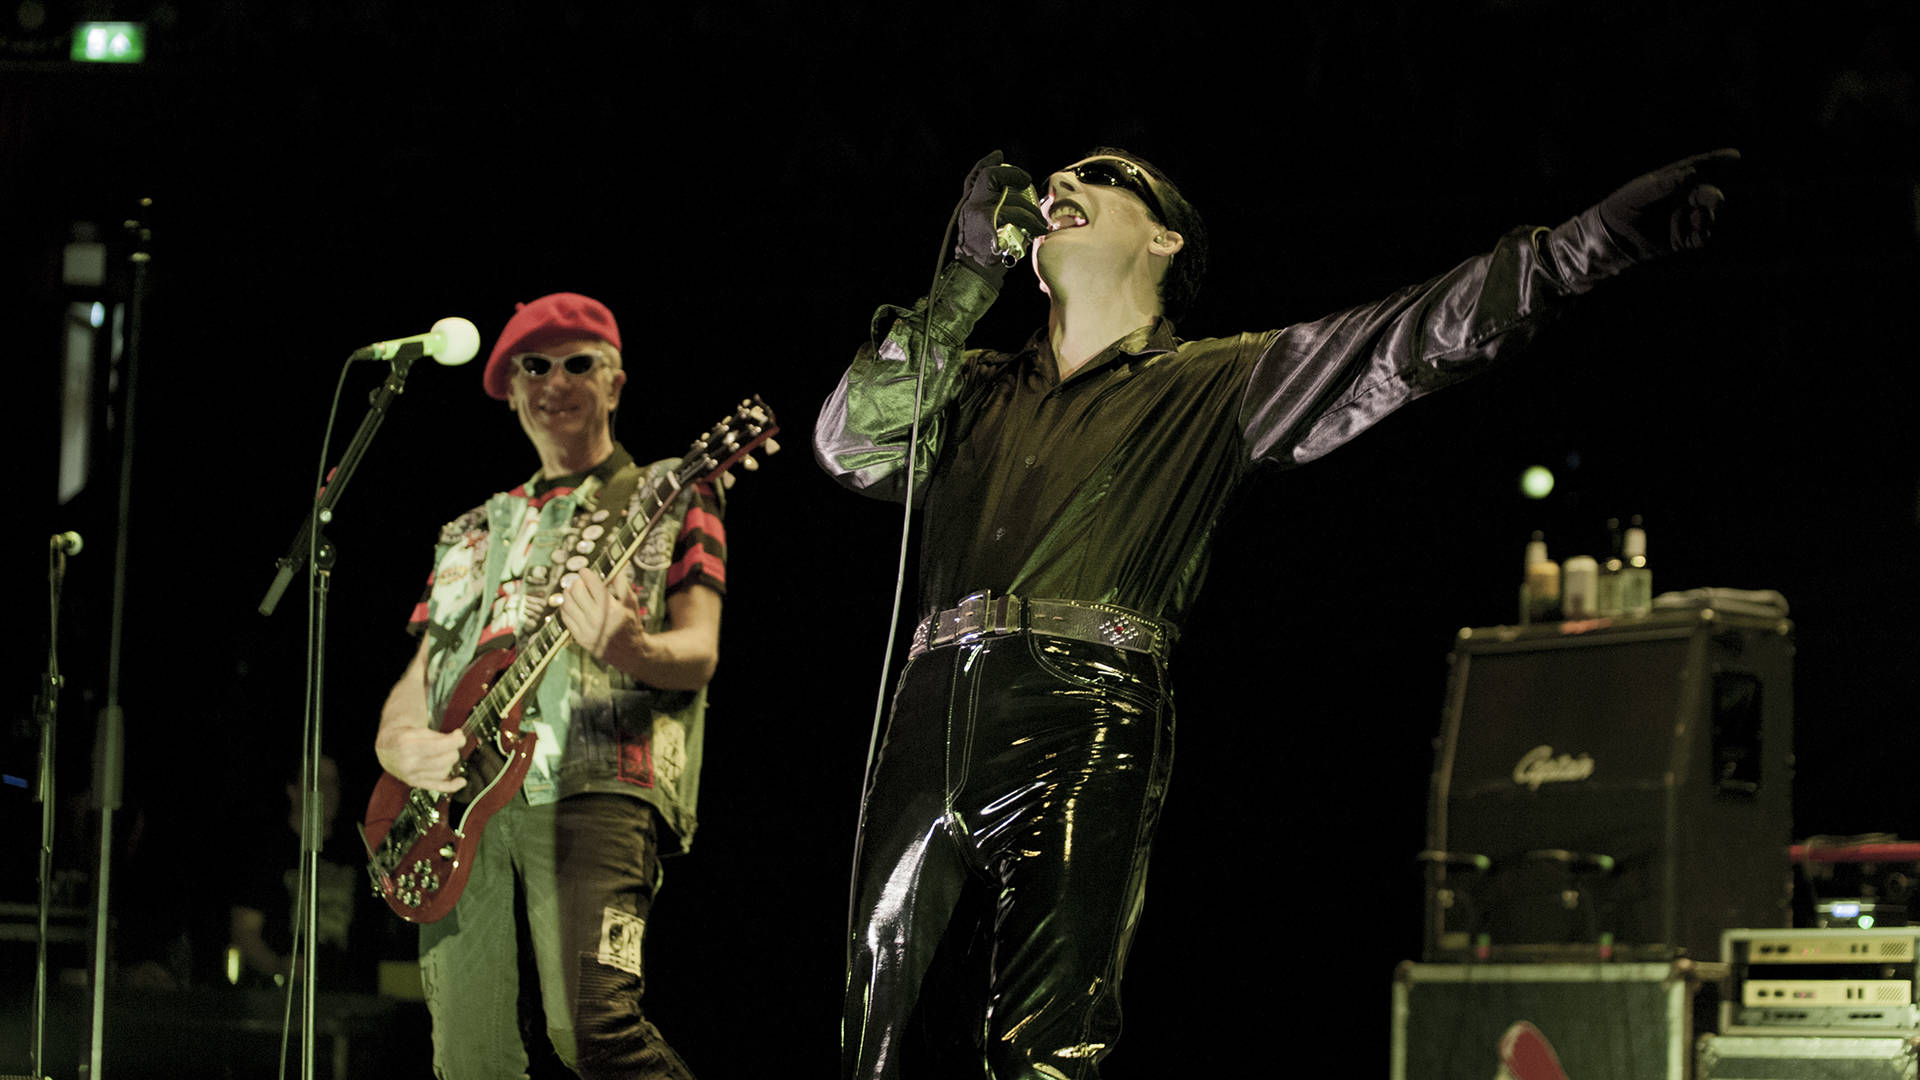 The Damned playing their 40th Anniversary show at Royal Albert Hall in 2016 Photo: Dod Morrison